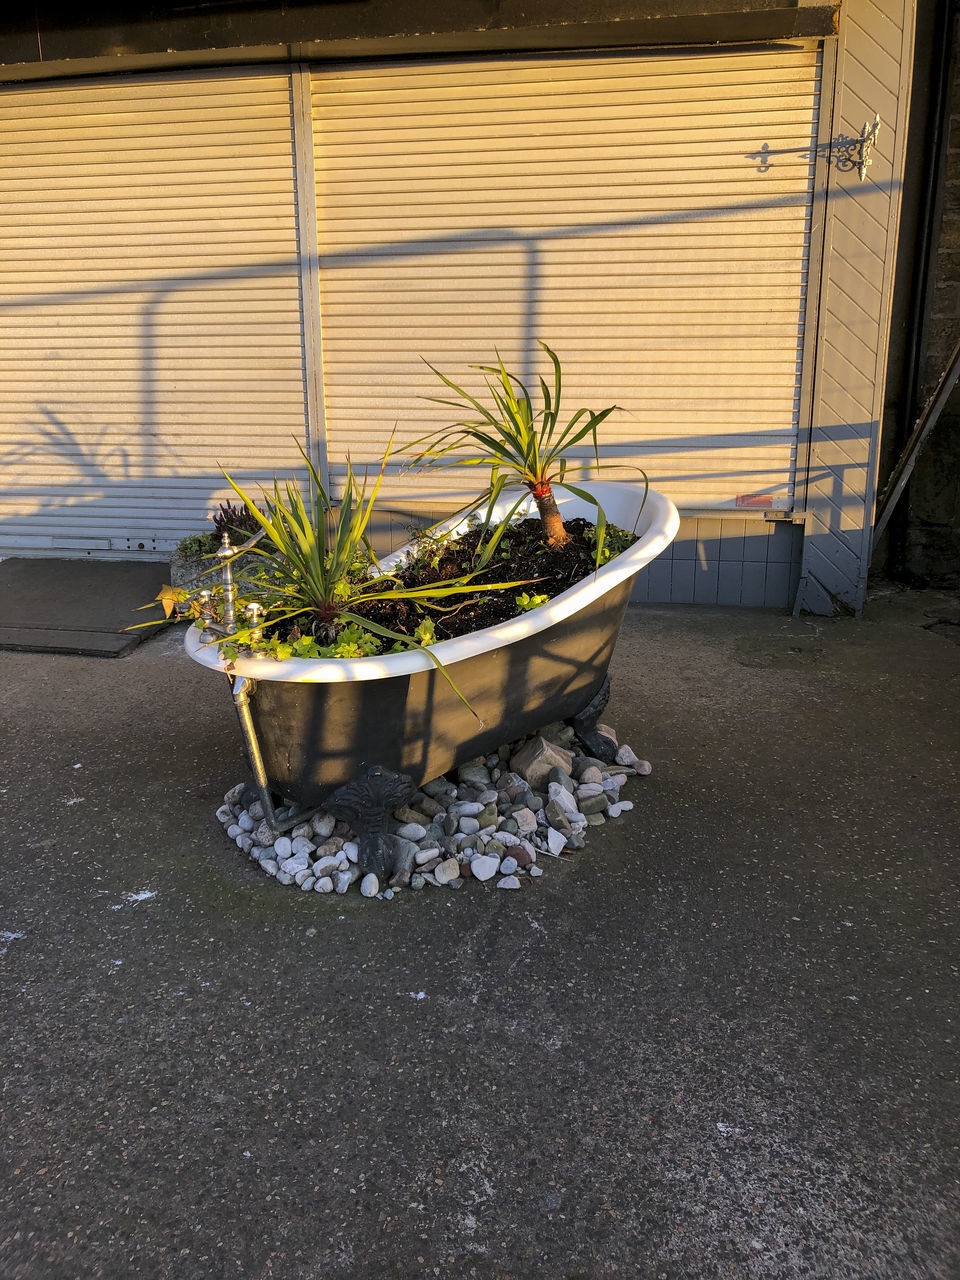 HIGH ANGLE VIEW OF POTTED PLANT ON STREET